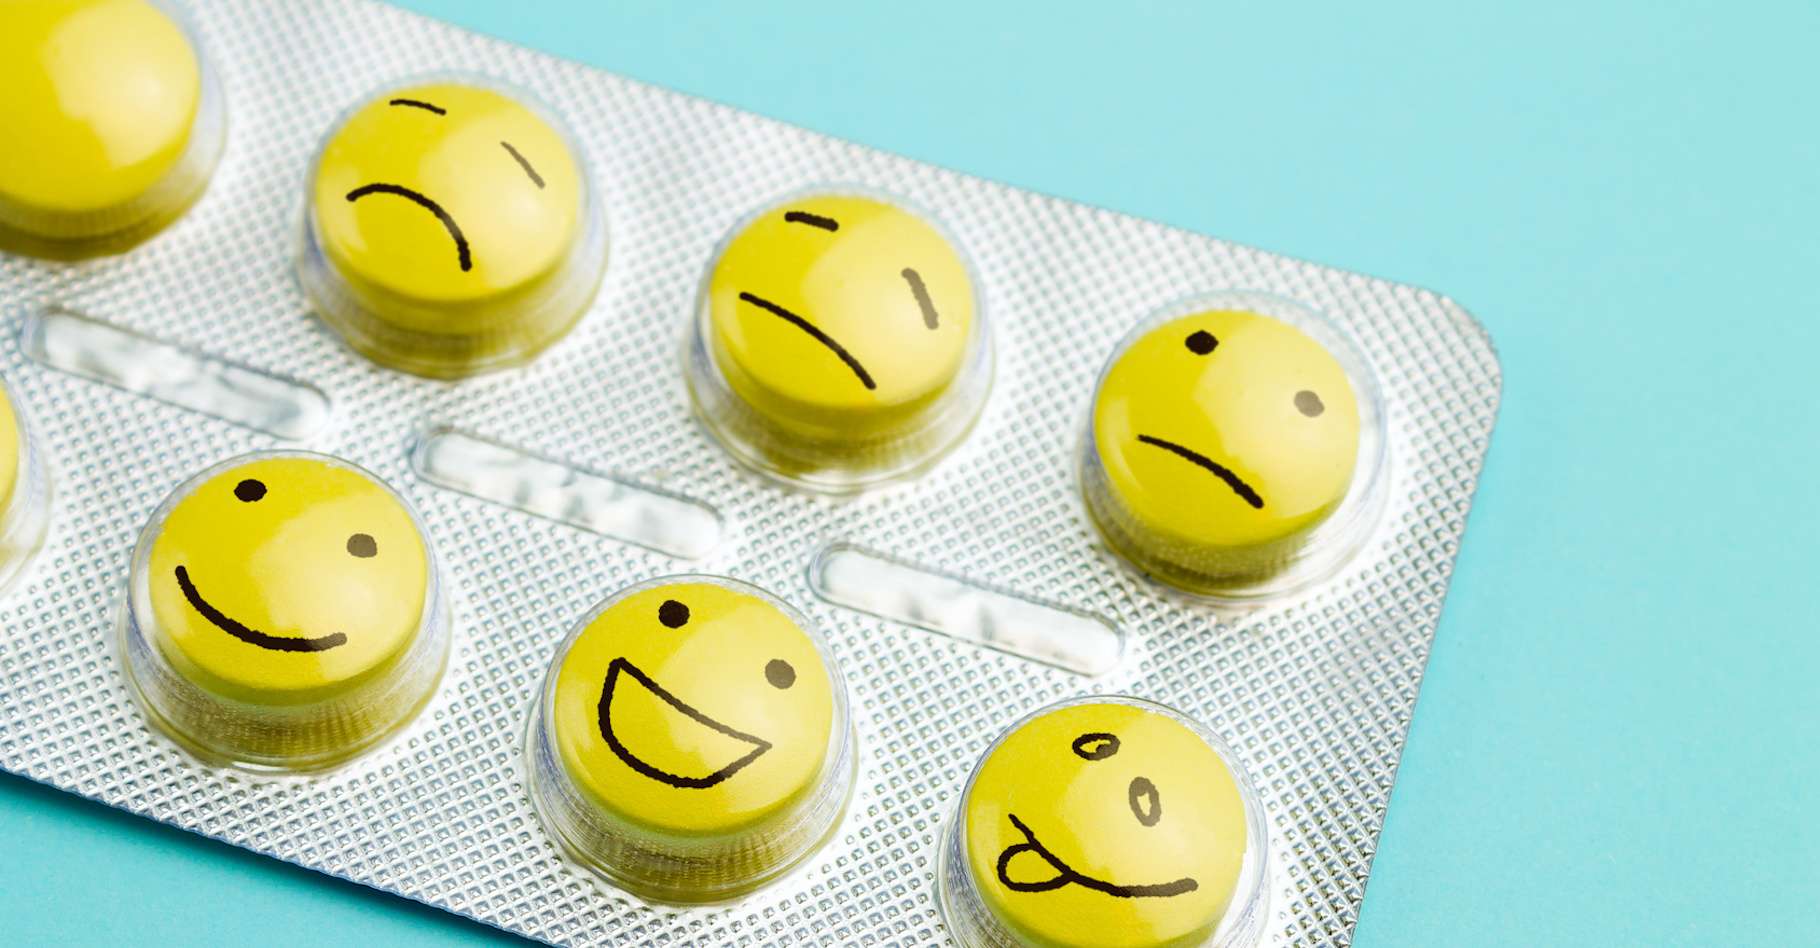 Scientists Have Turned These Drugs Into Antidepressants Without The Hallucinations